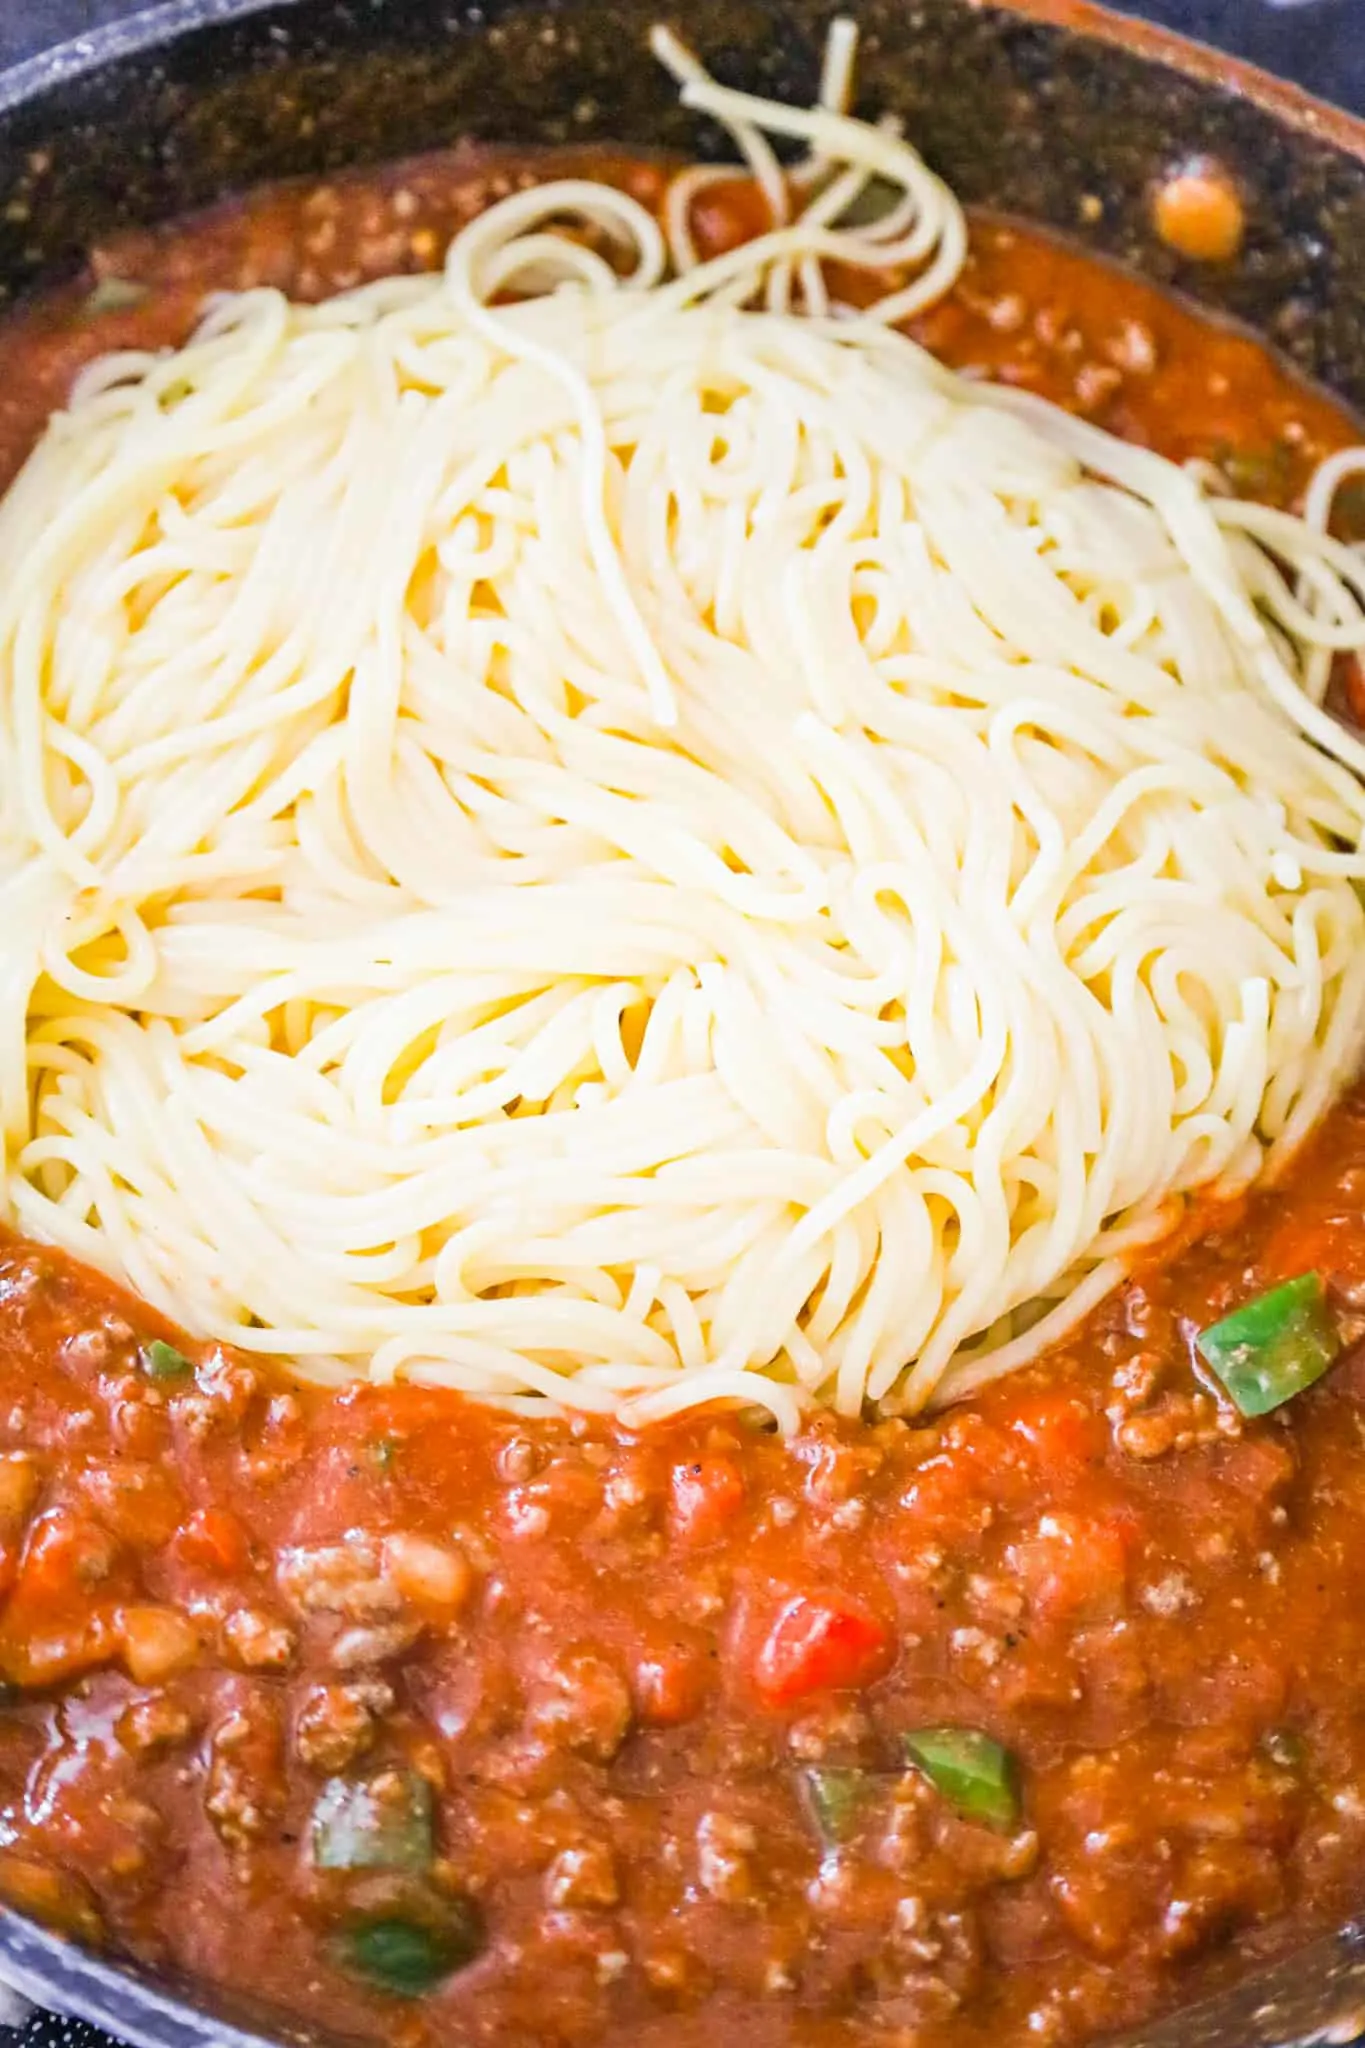 cooked spaghetti added to tomato sauce and ground beef mixture in a saute pan